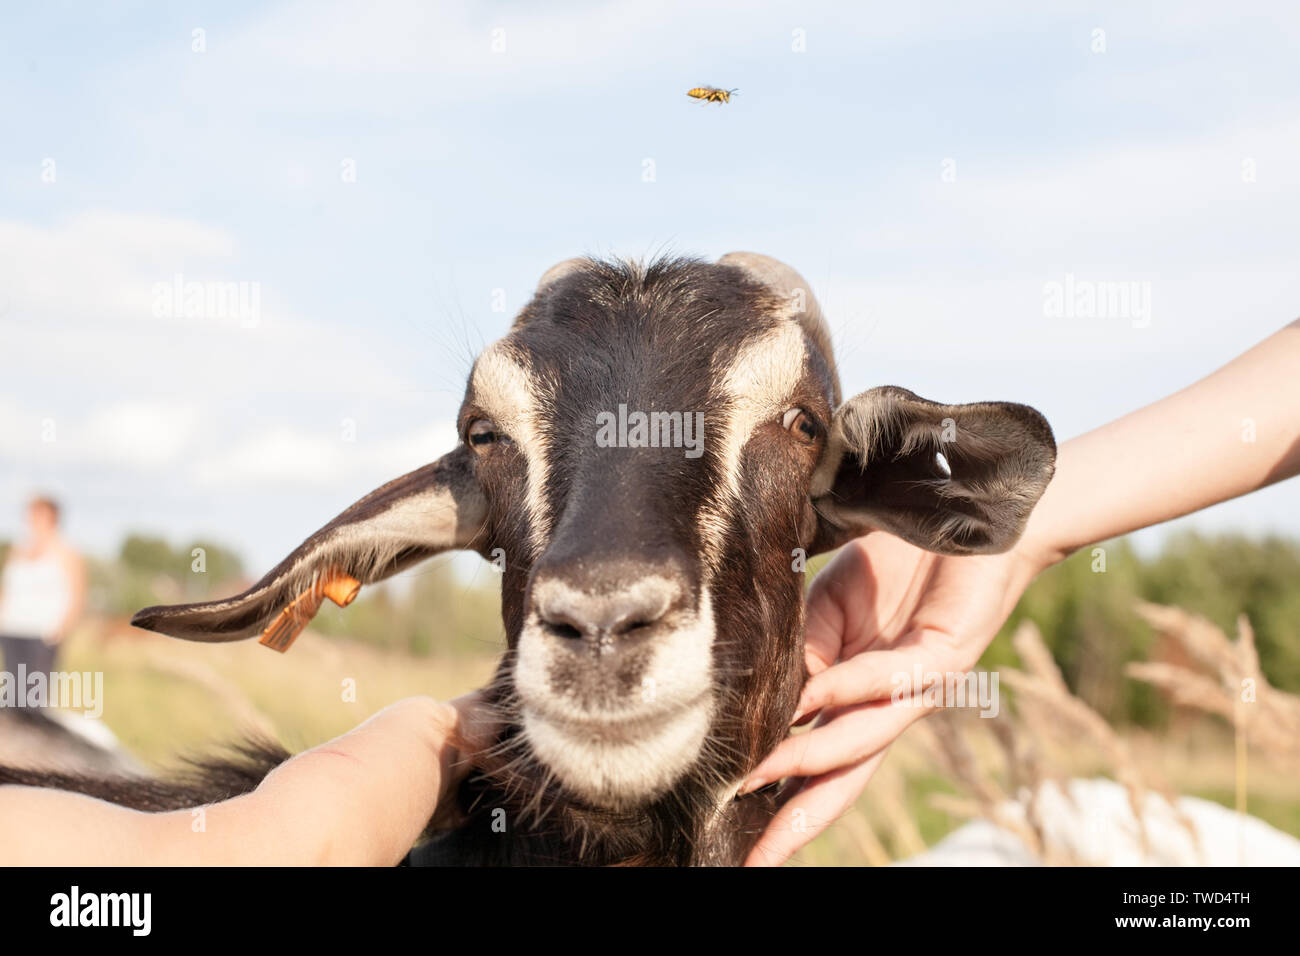 funny goat head portrait closeup view on sky background Stock Photo